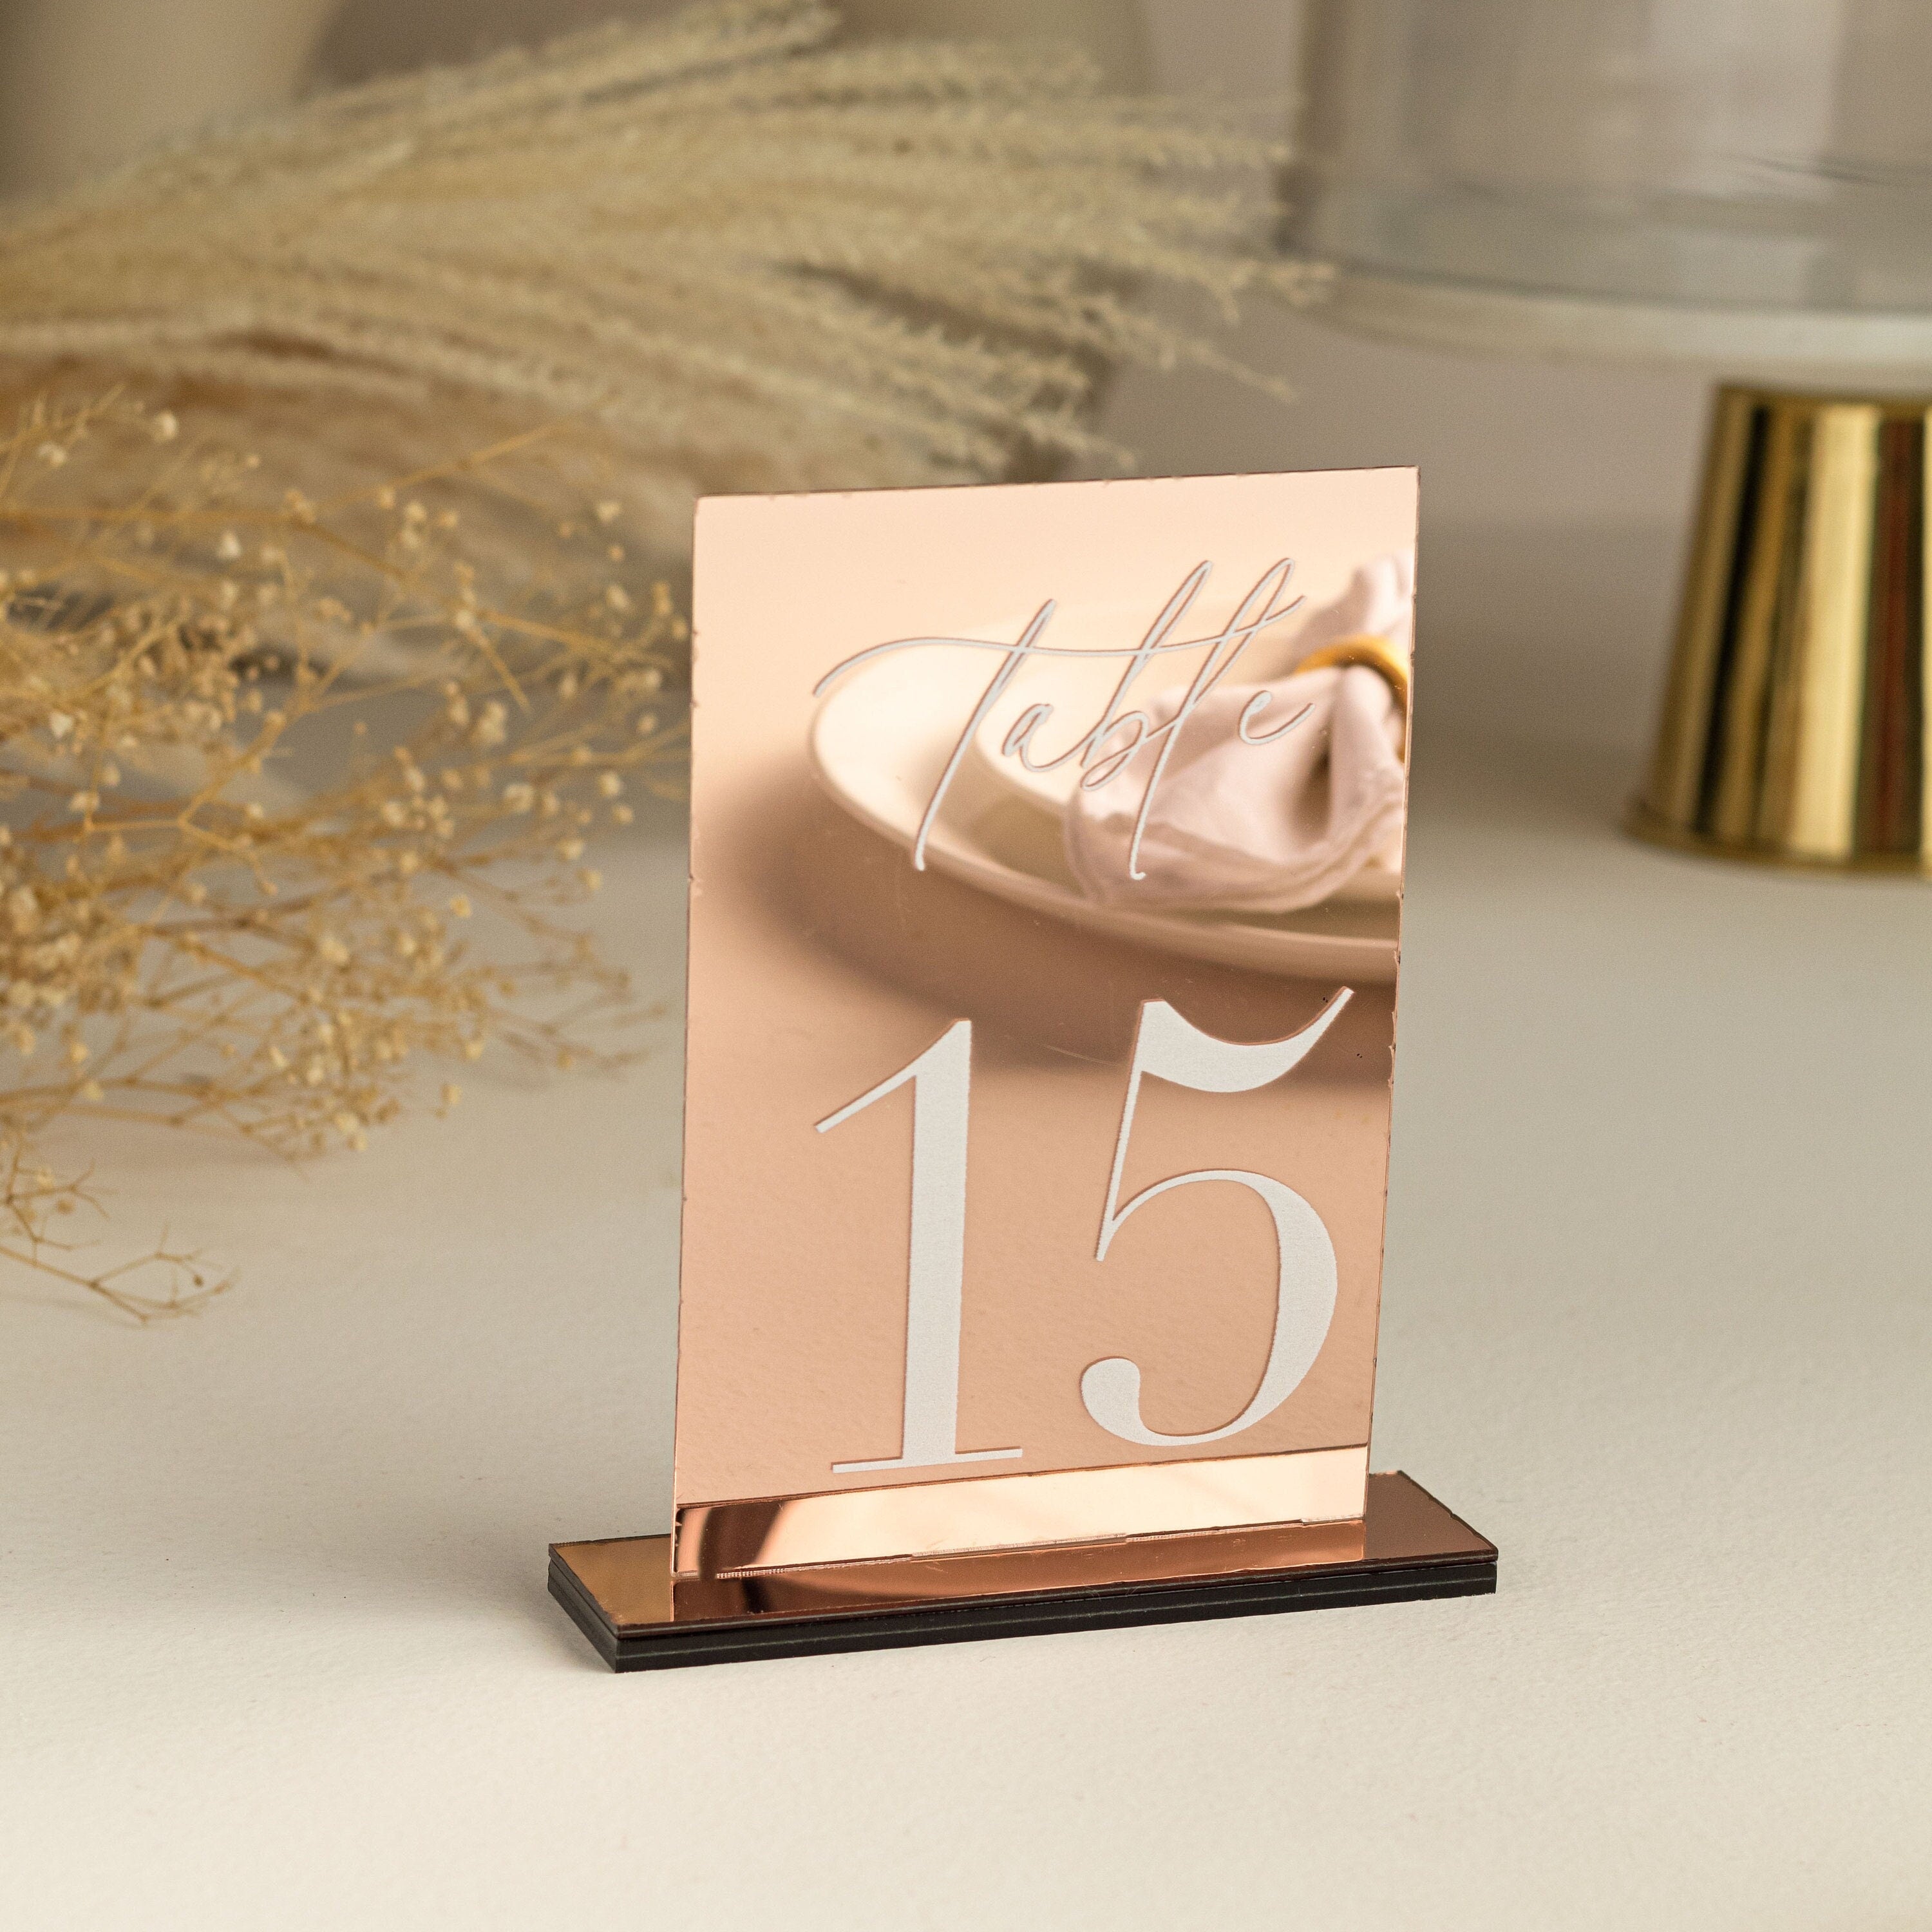 Mirror Rose Gold Table Numbers | Acrylic Table Numbers | Table Number Wedding , Centerpieces Luxury Decorations, Wedding decorations